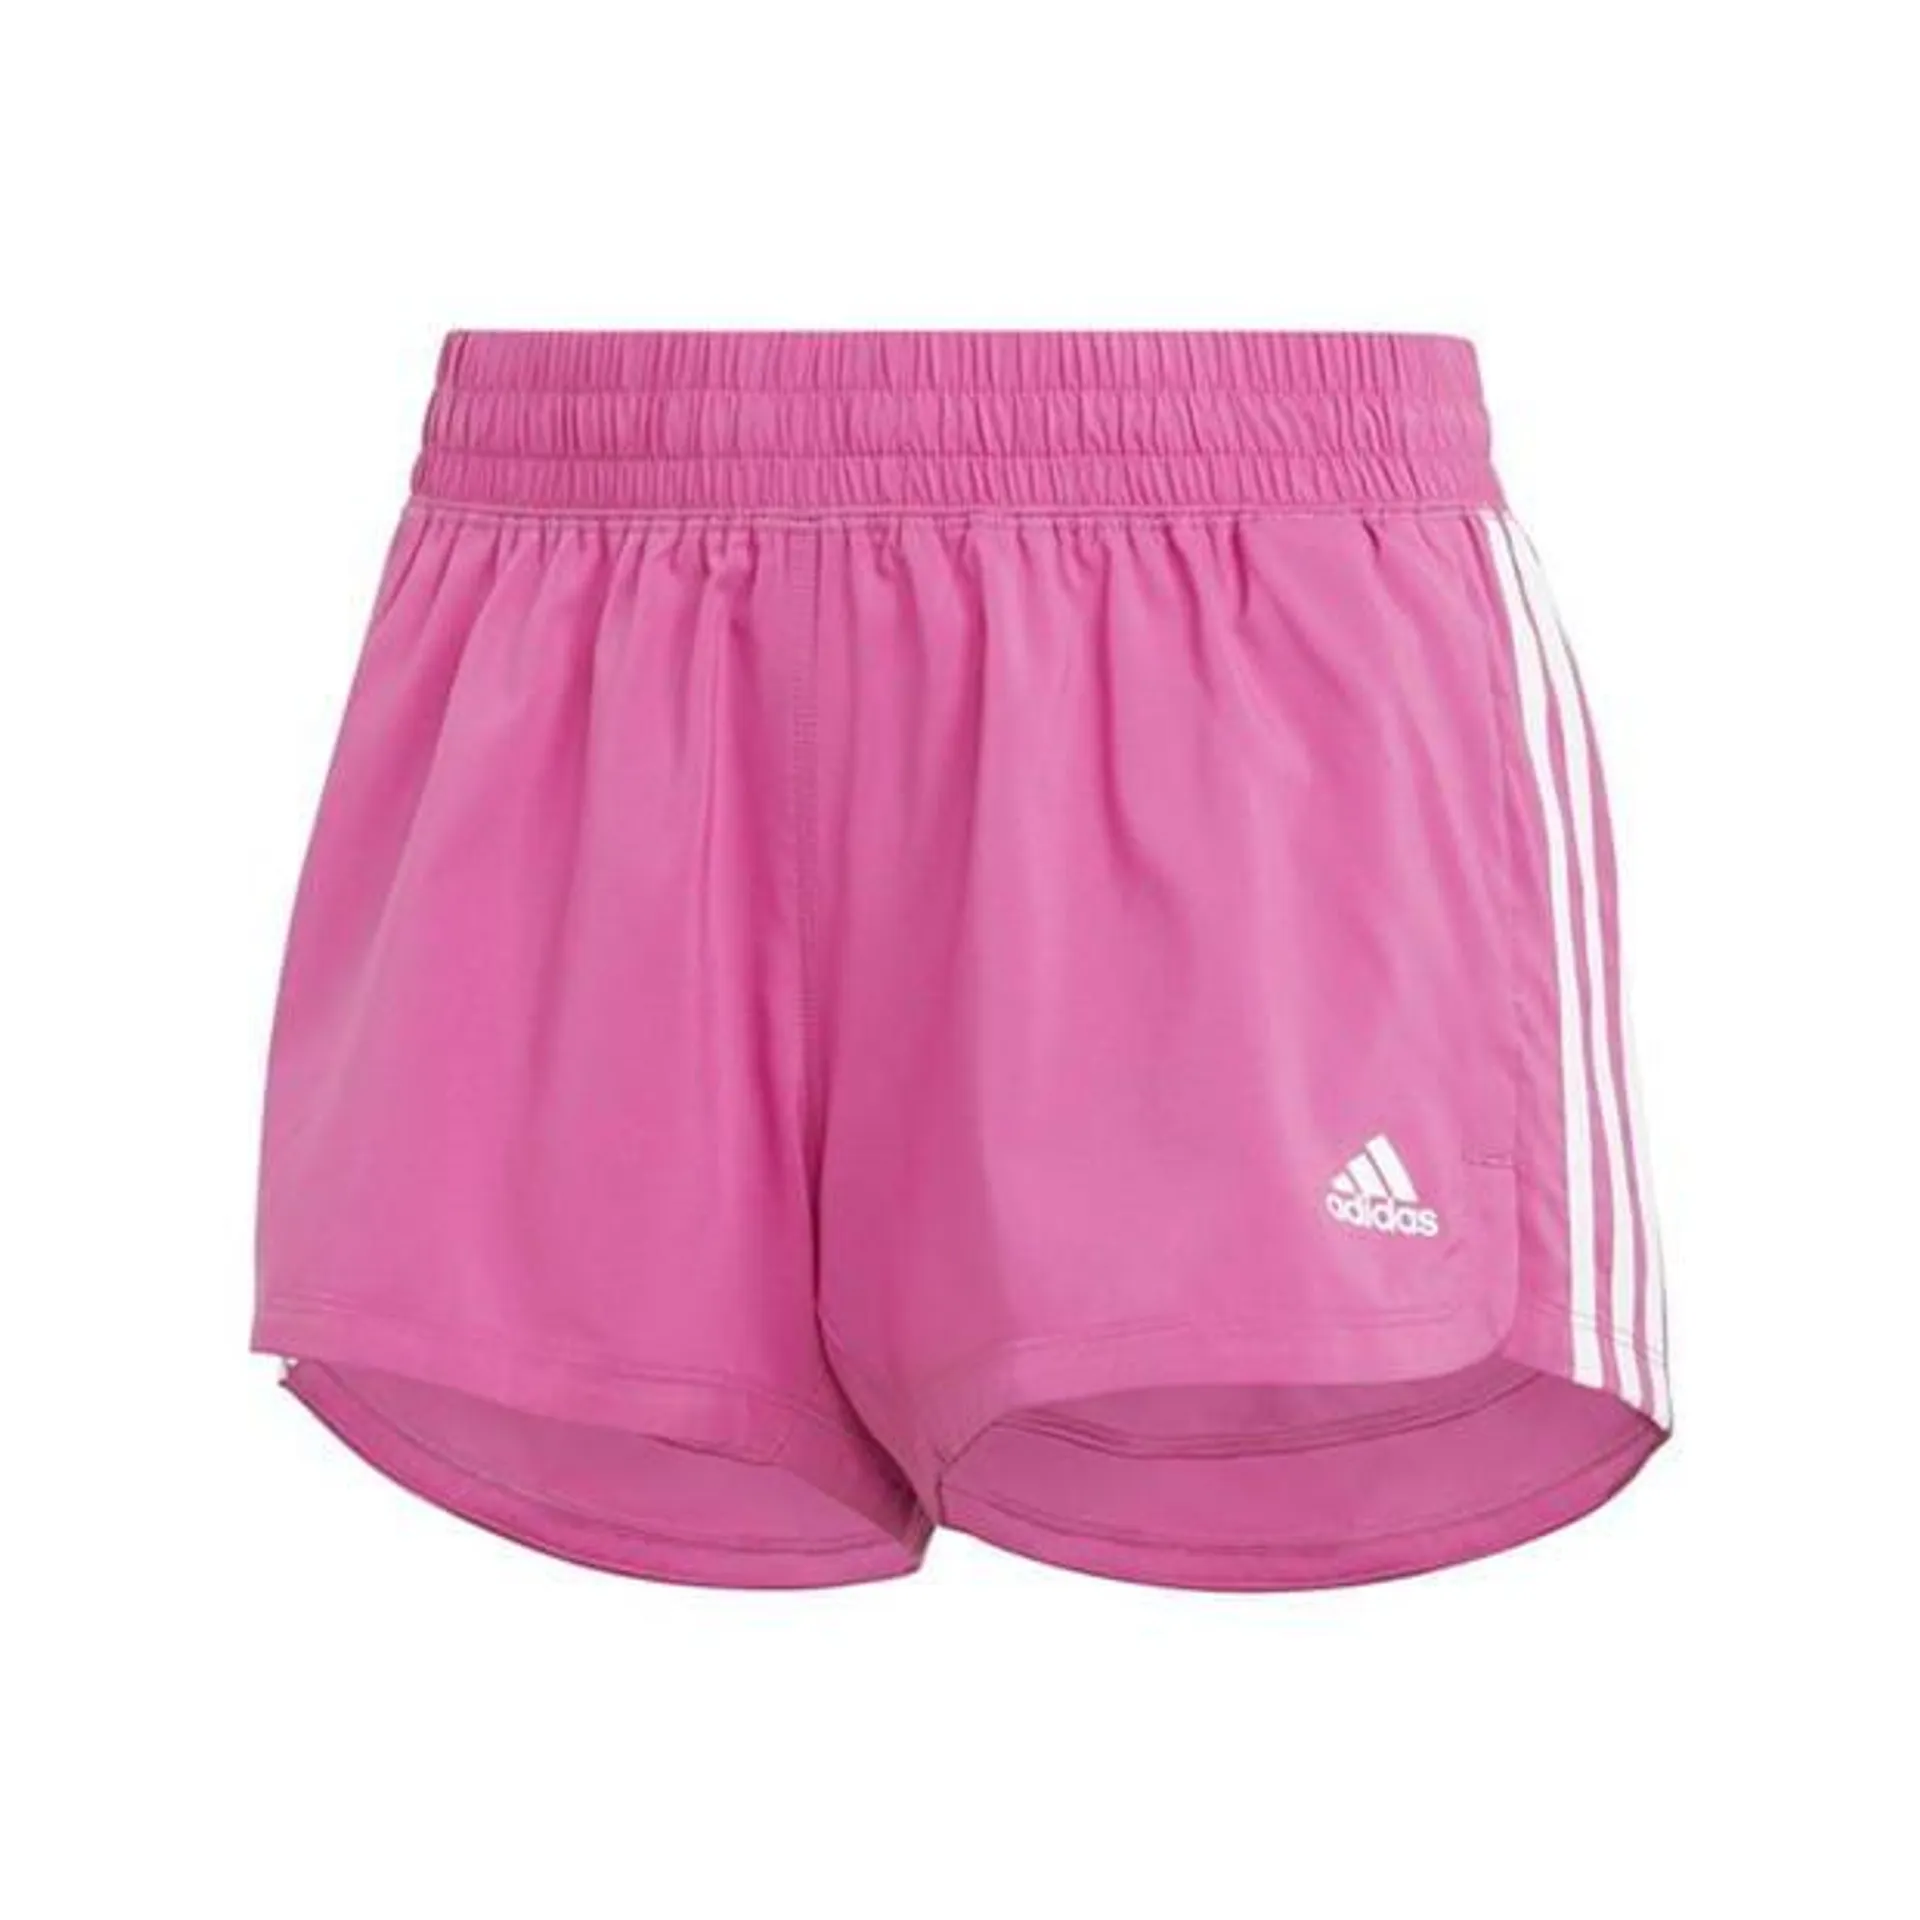 Pacer 3 Stripes Woven Shorts